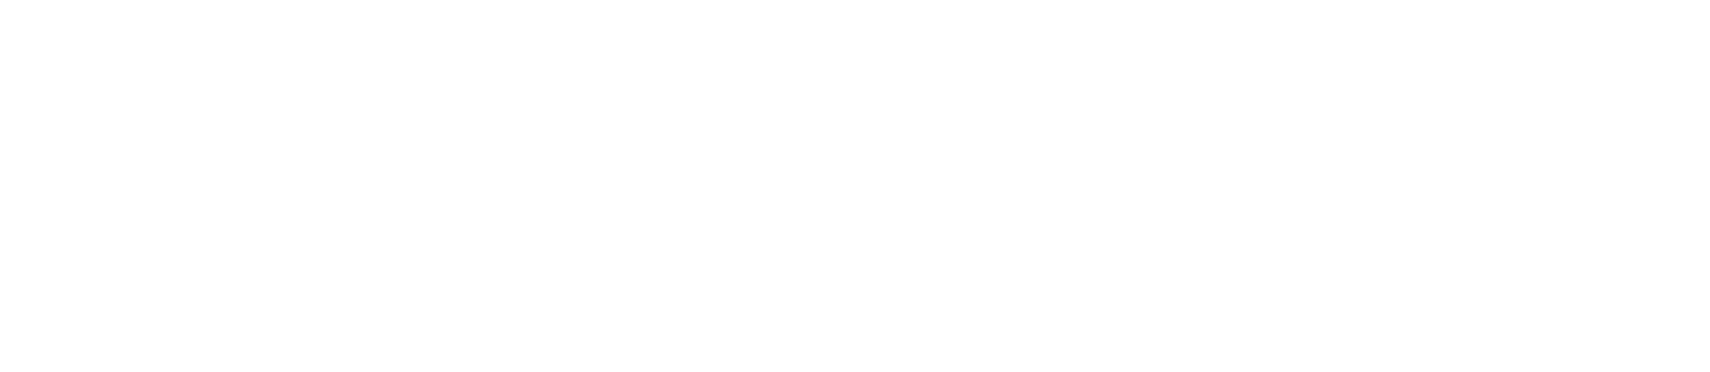 Jayne's Country Cruisers logo in white